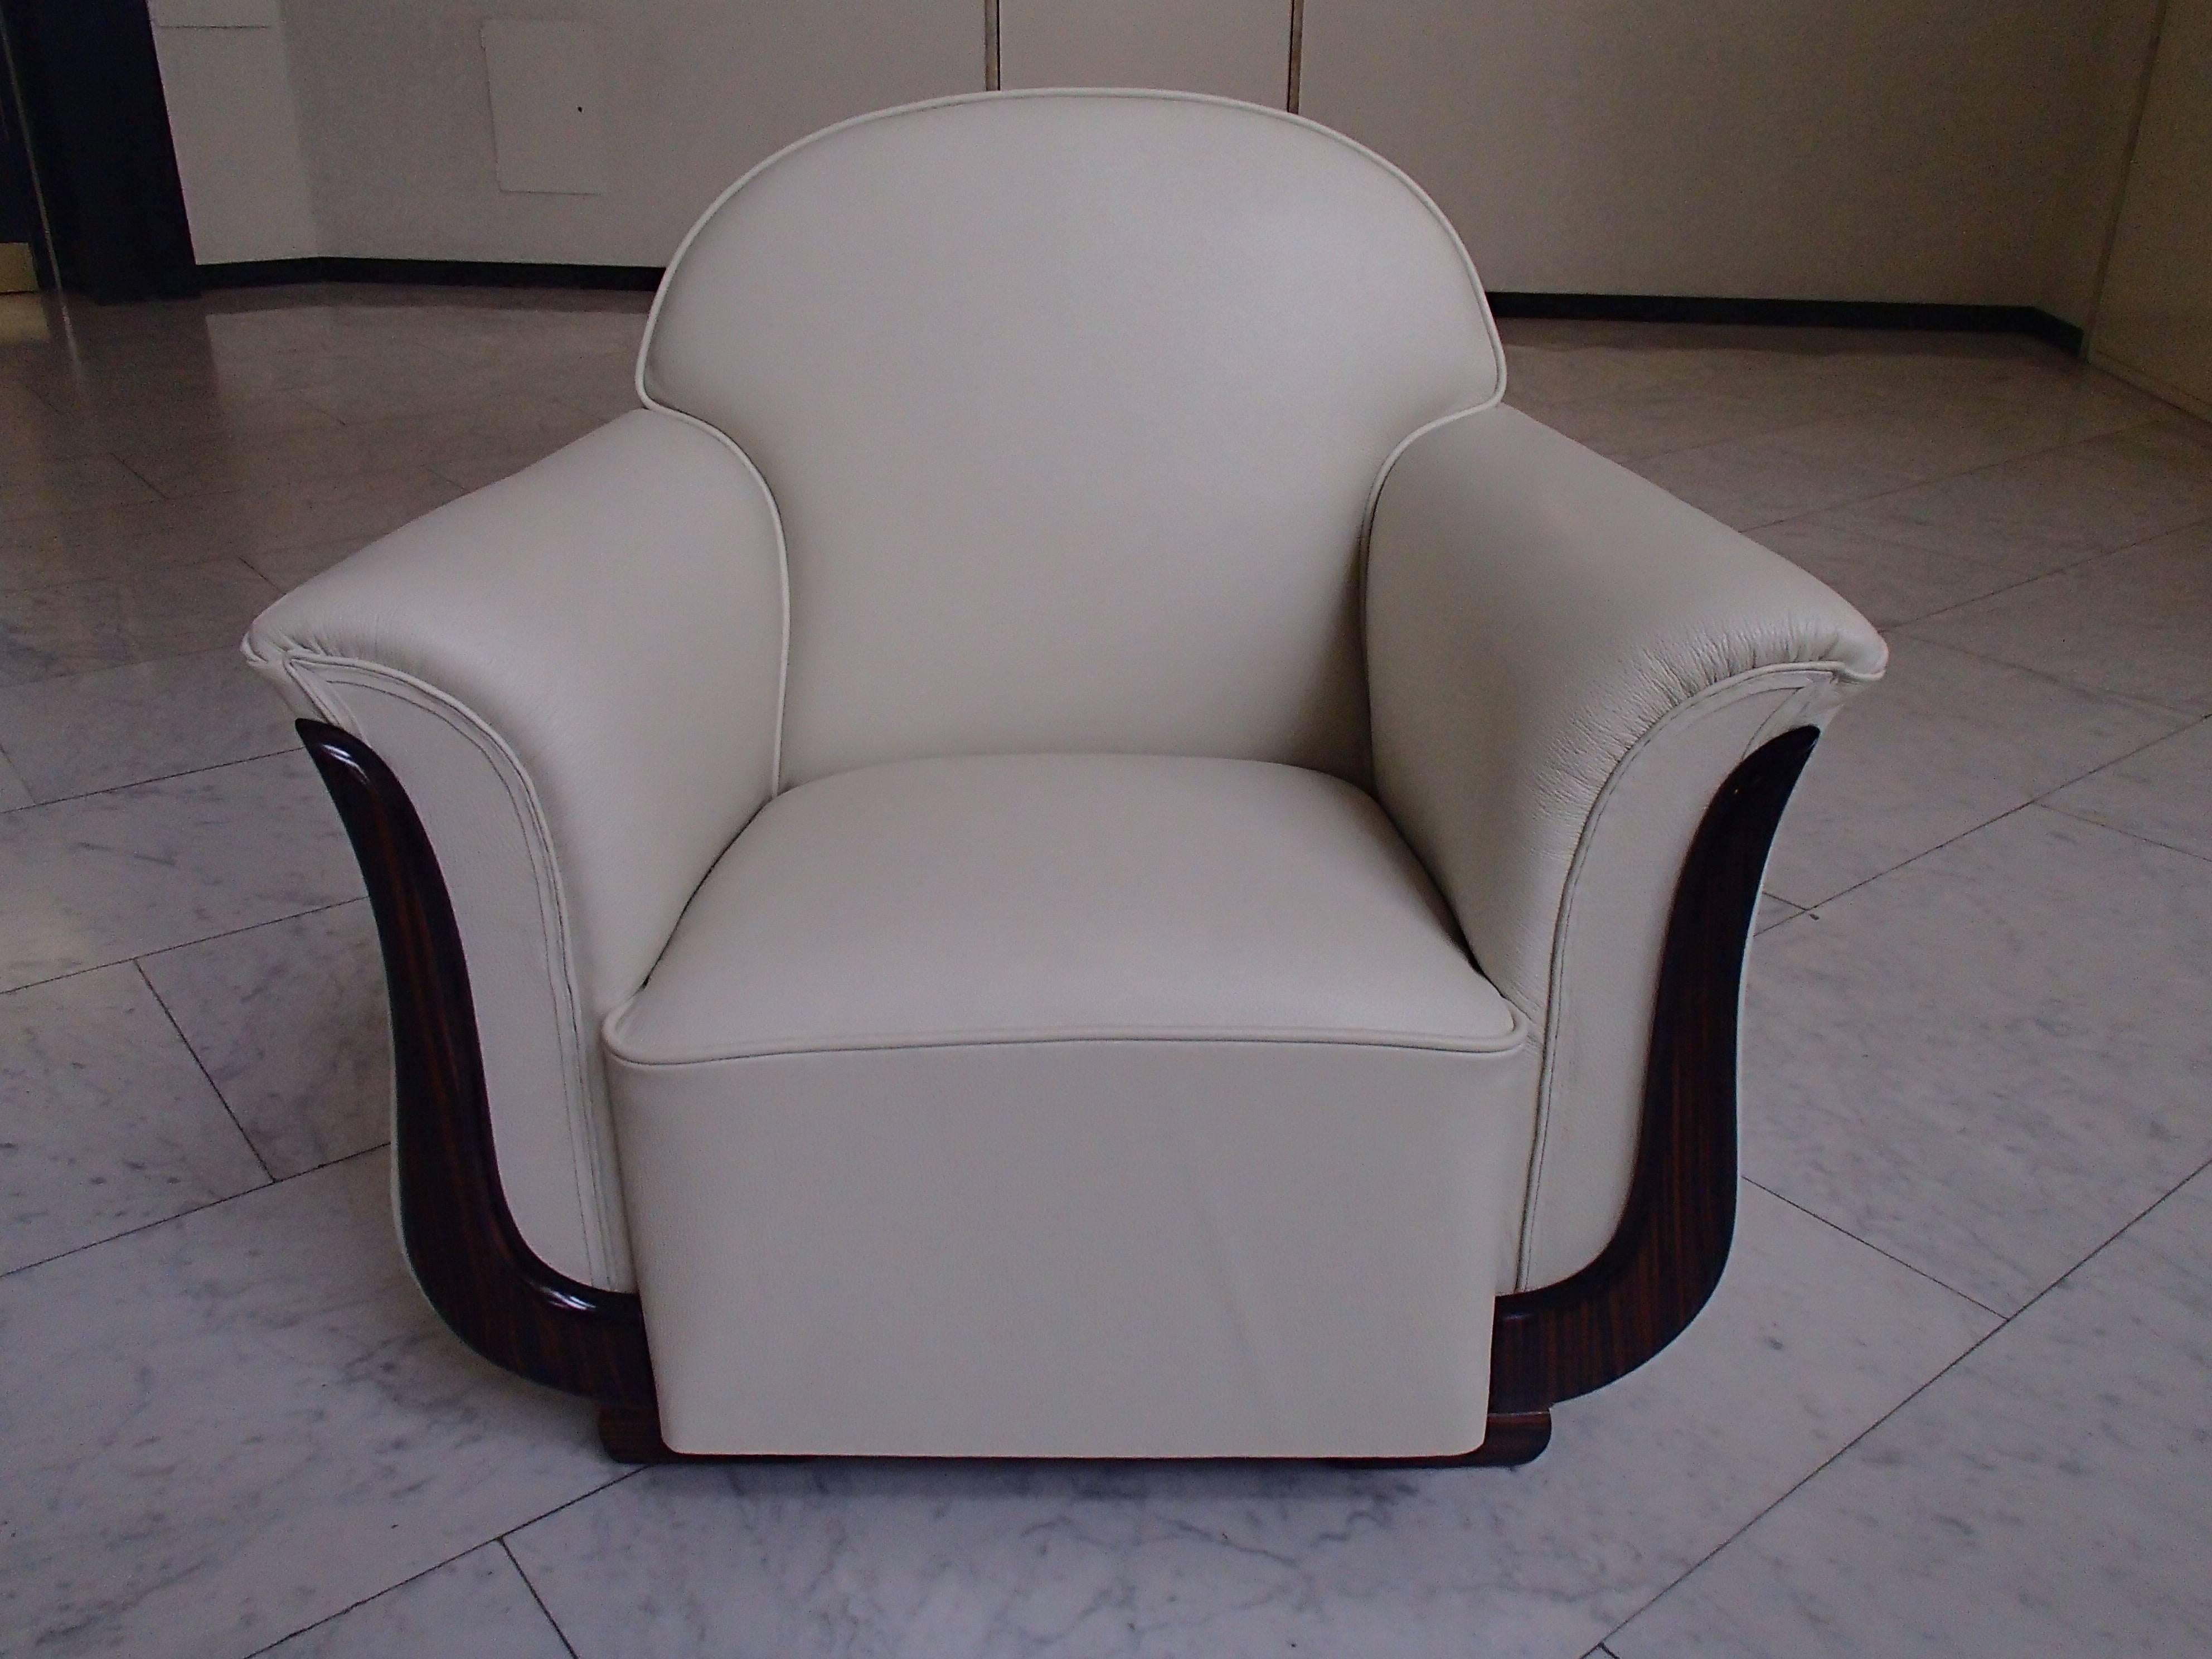 Completely restored reupholstered and covered with off-white leather with ebene de Macassar decors.